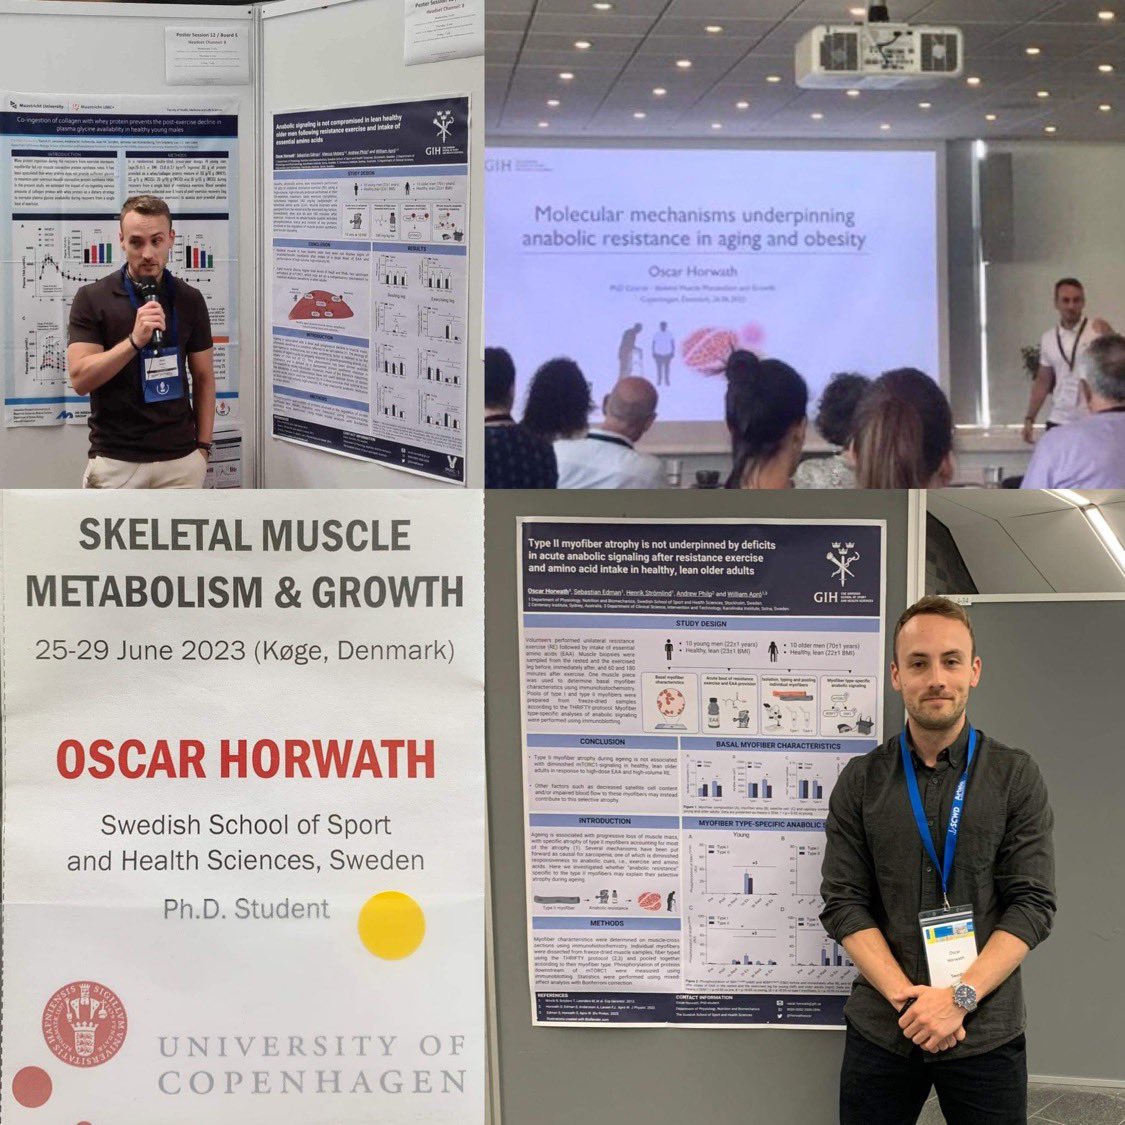 3 busy weeks on the run finally comes to an end as I’m flying home tomorrow. Enjoyed presenting our data on muscle anabolic resistance in Stockholm at #SCWD23, in Copenhagen at the excellent PhD-course #MuscleCPH2023, and lastly this week in Paris at the #ECSS2023.